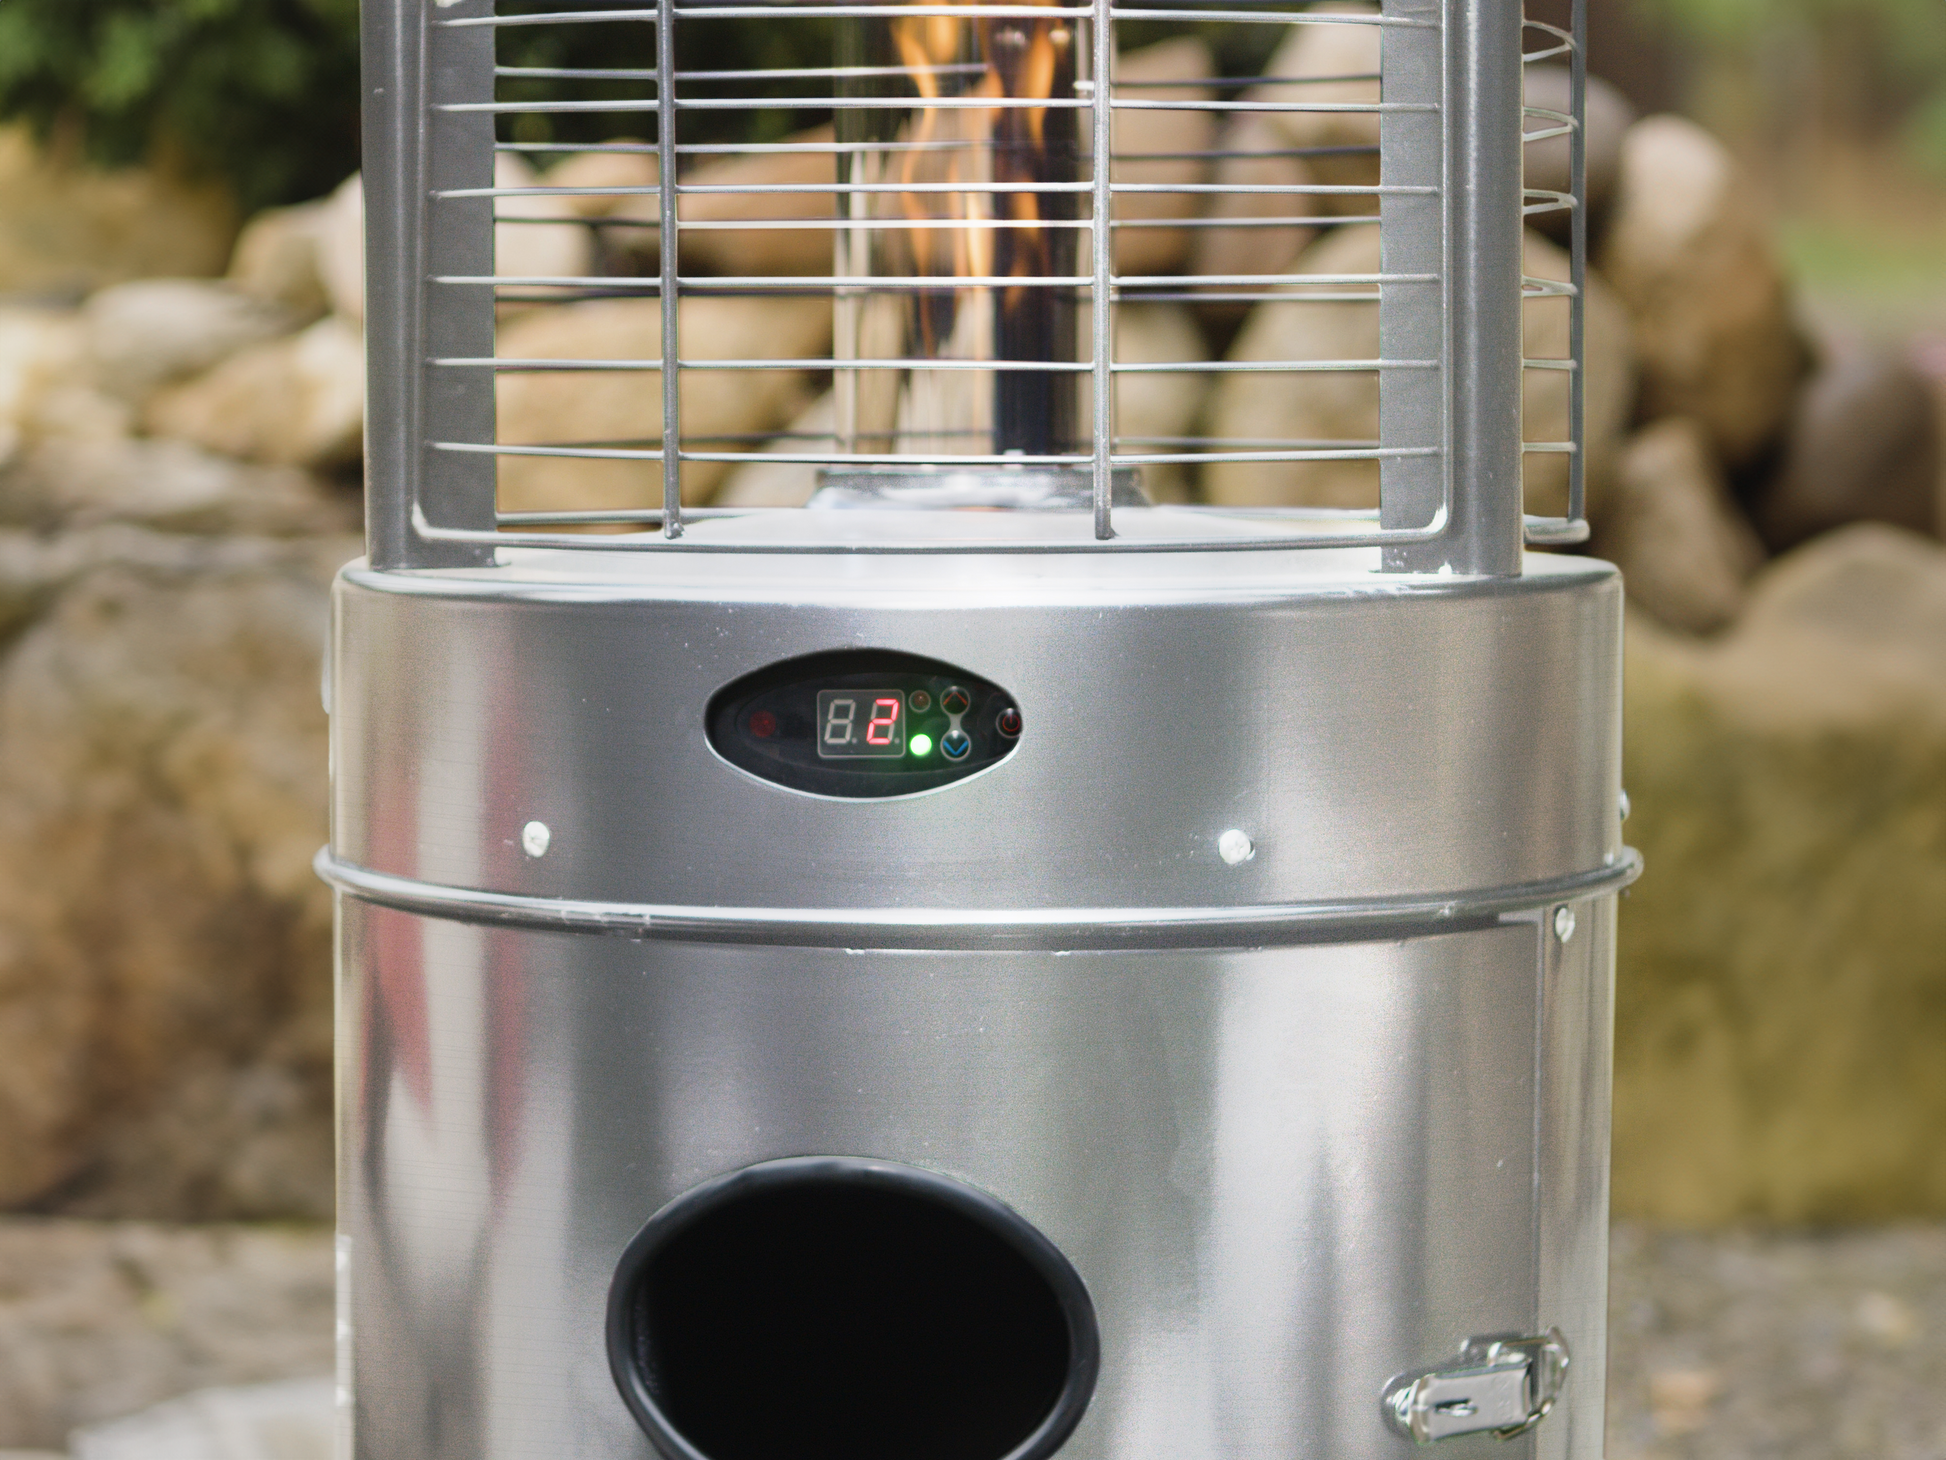 Close up of the Illume Patio Heater in Stainless Steel finish. Digital panel and visible flame can be seen.